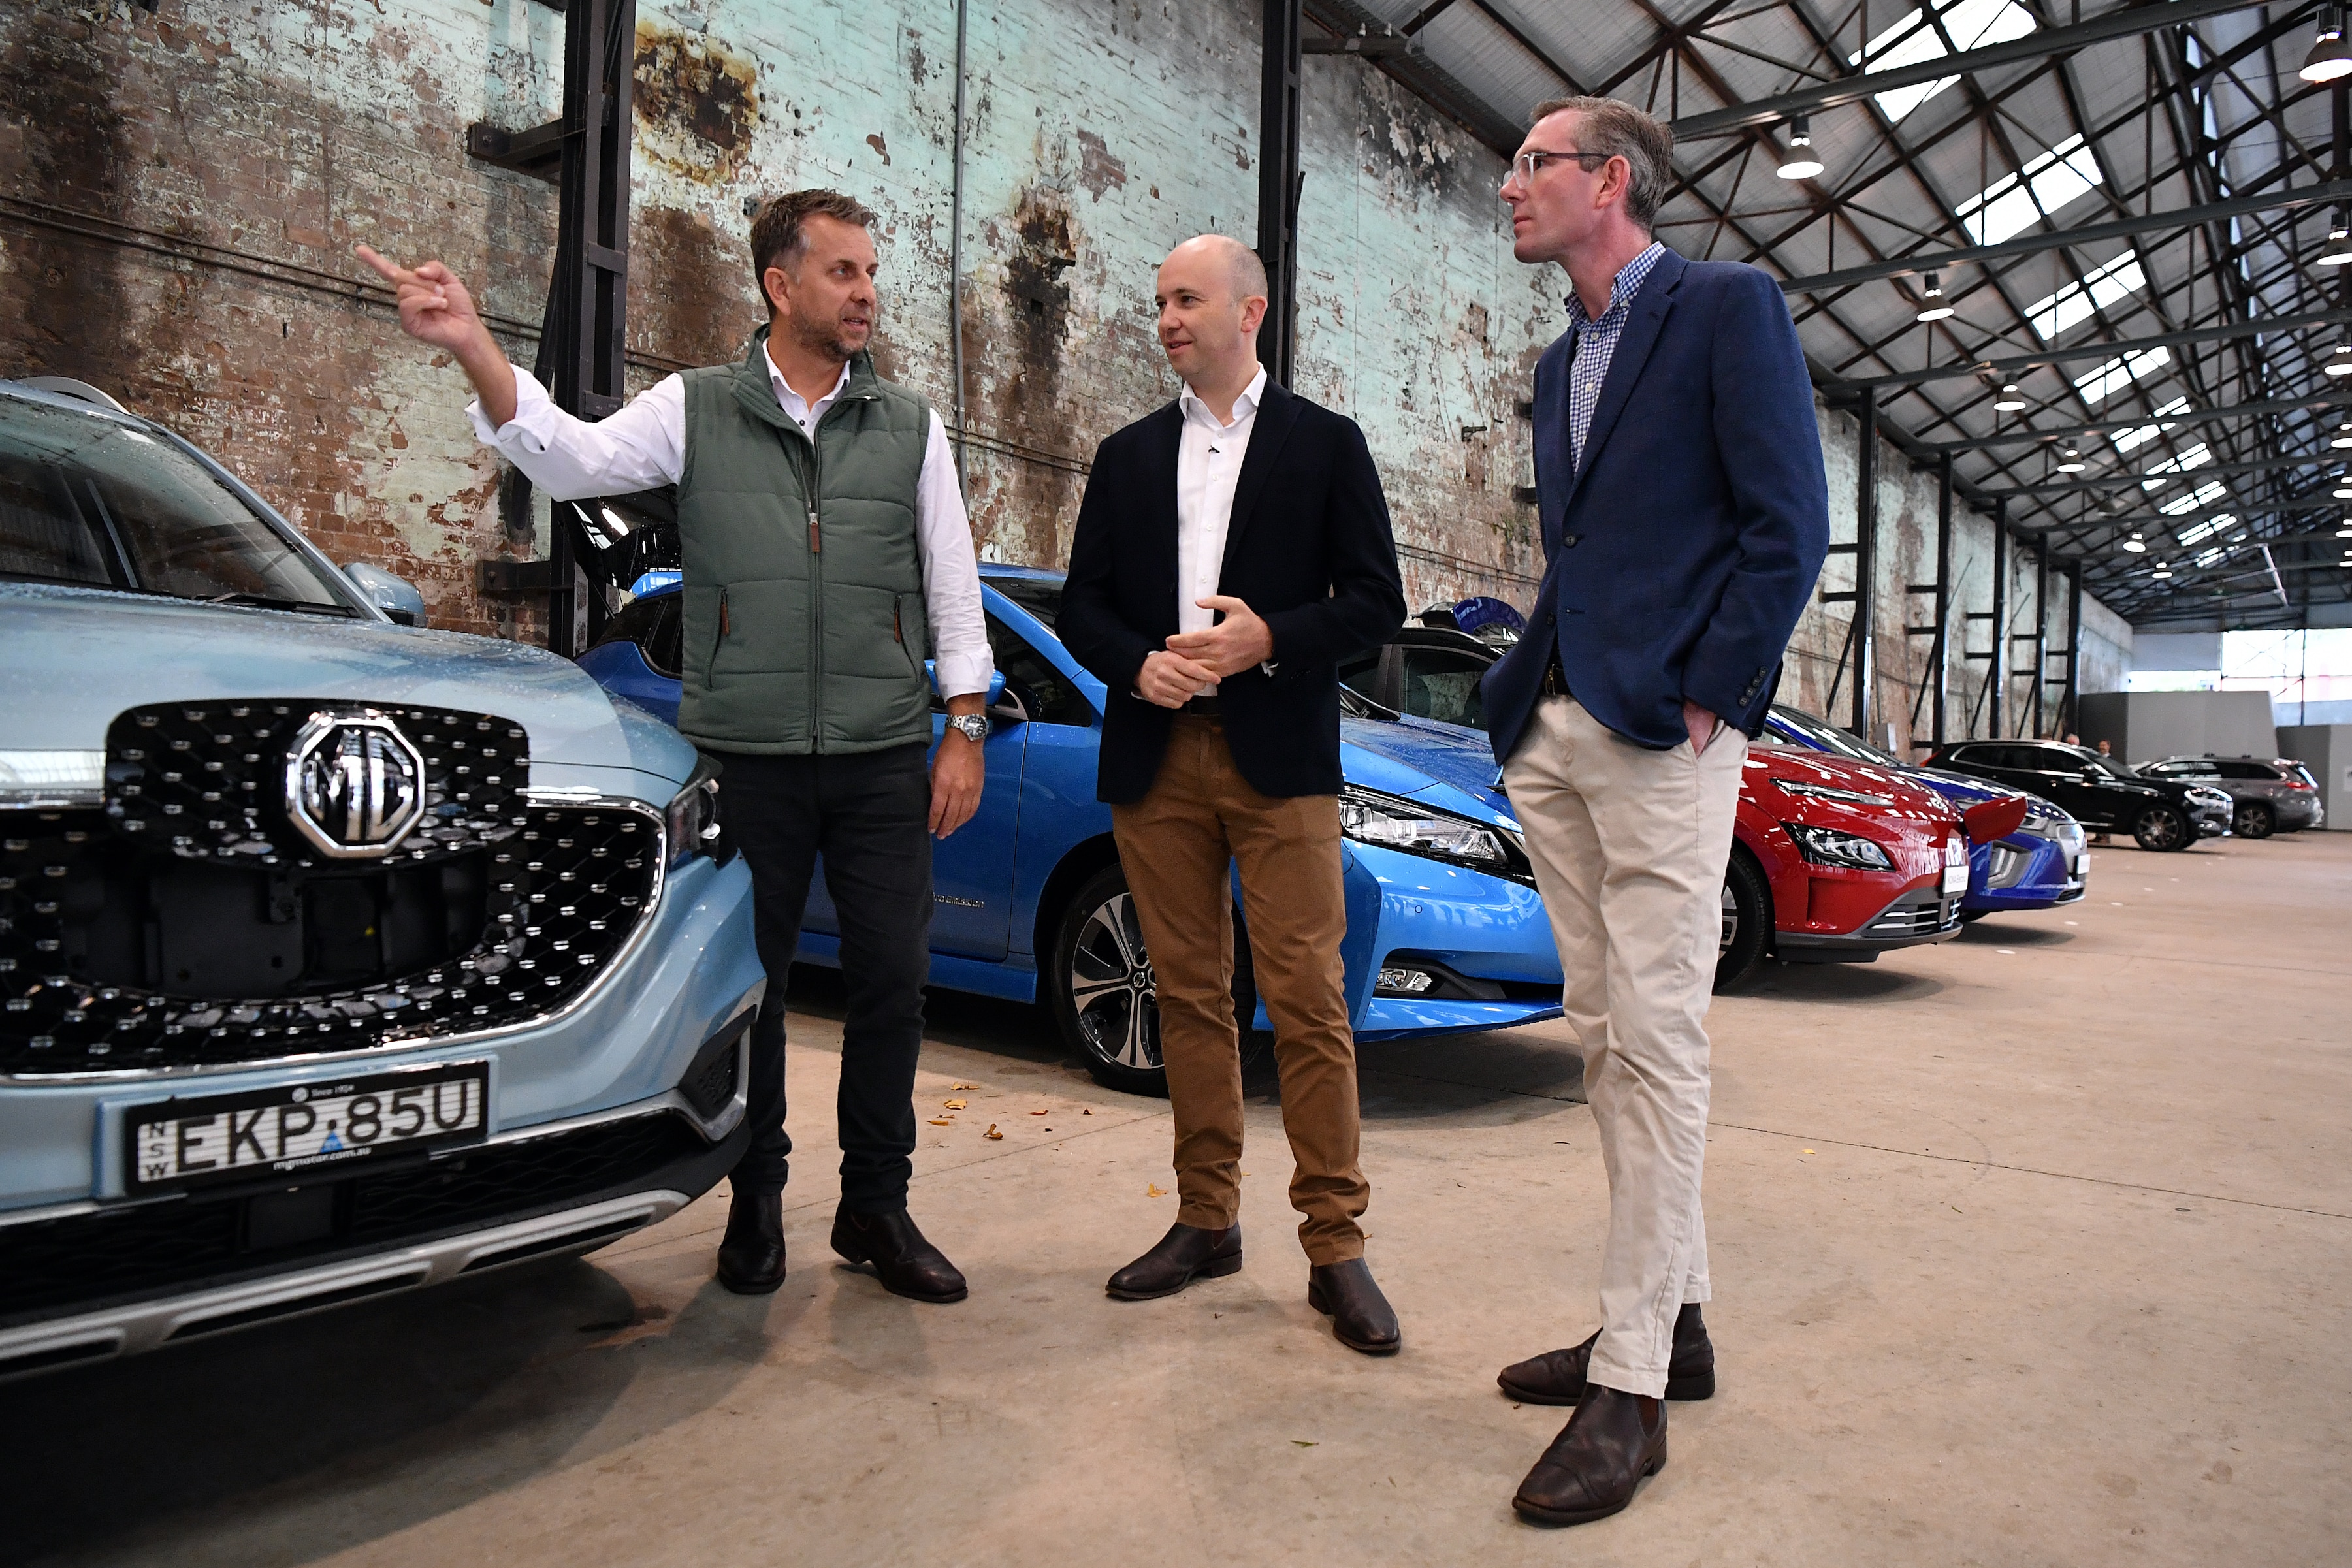 NSW Transport Minister Andrew Constance, Energy and Environment Minister Matt Kean an Treasurer Dominic Perrottet inspect electric cars in Sydney on Sunday.